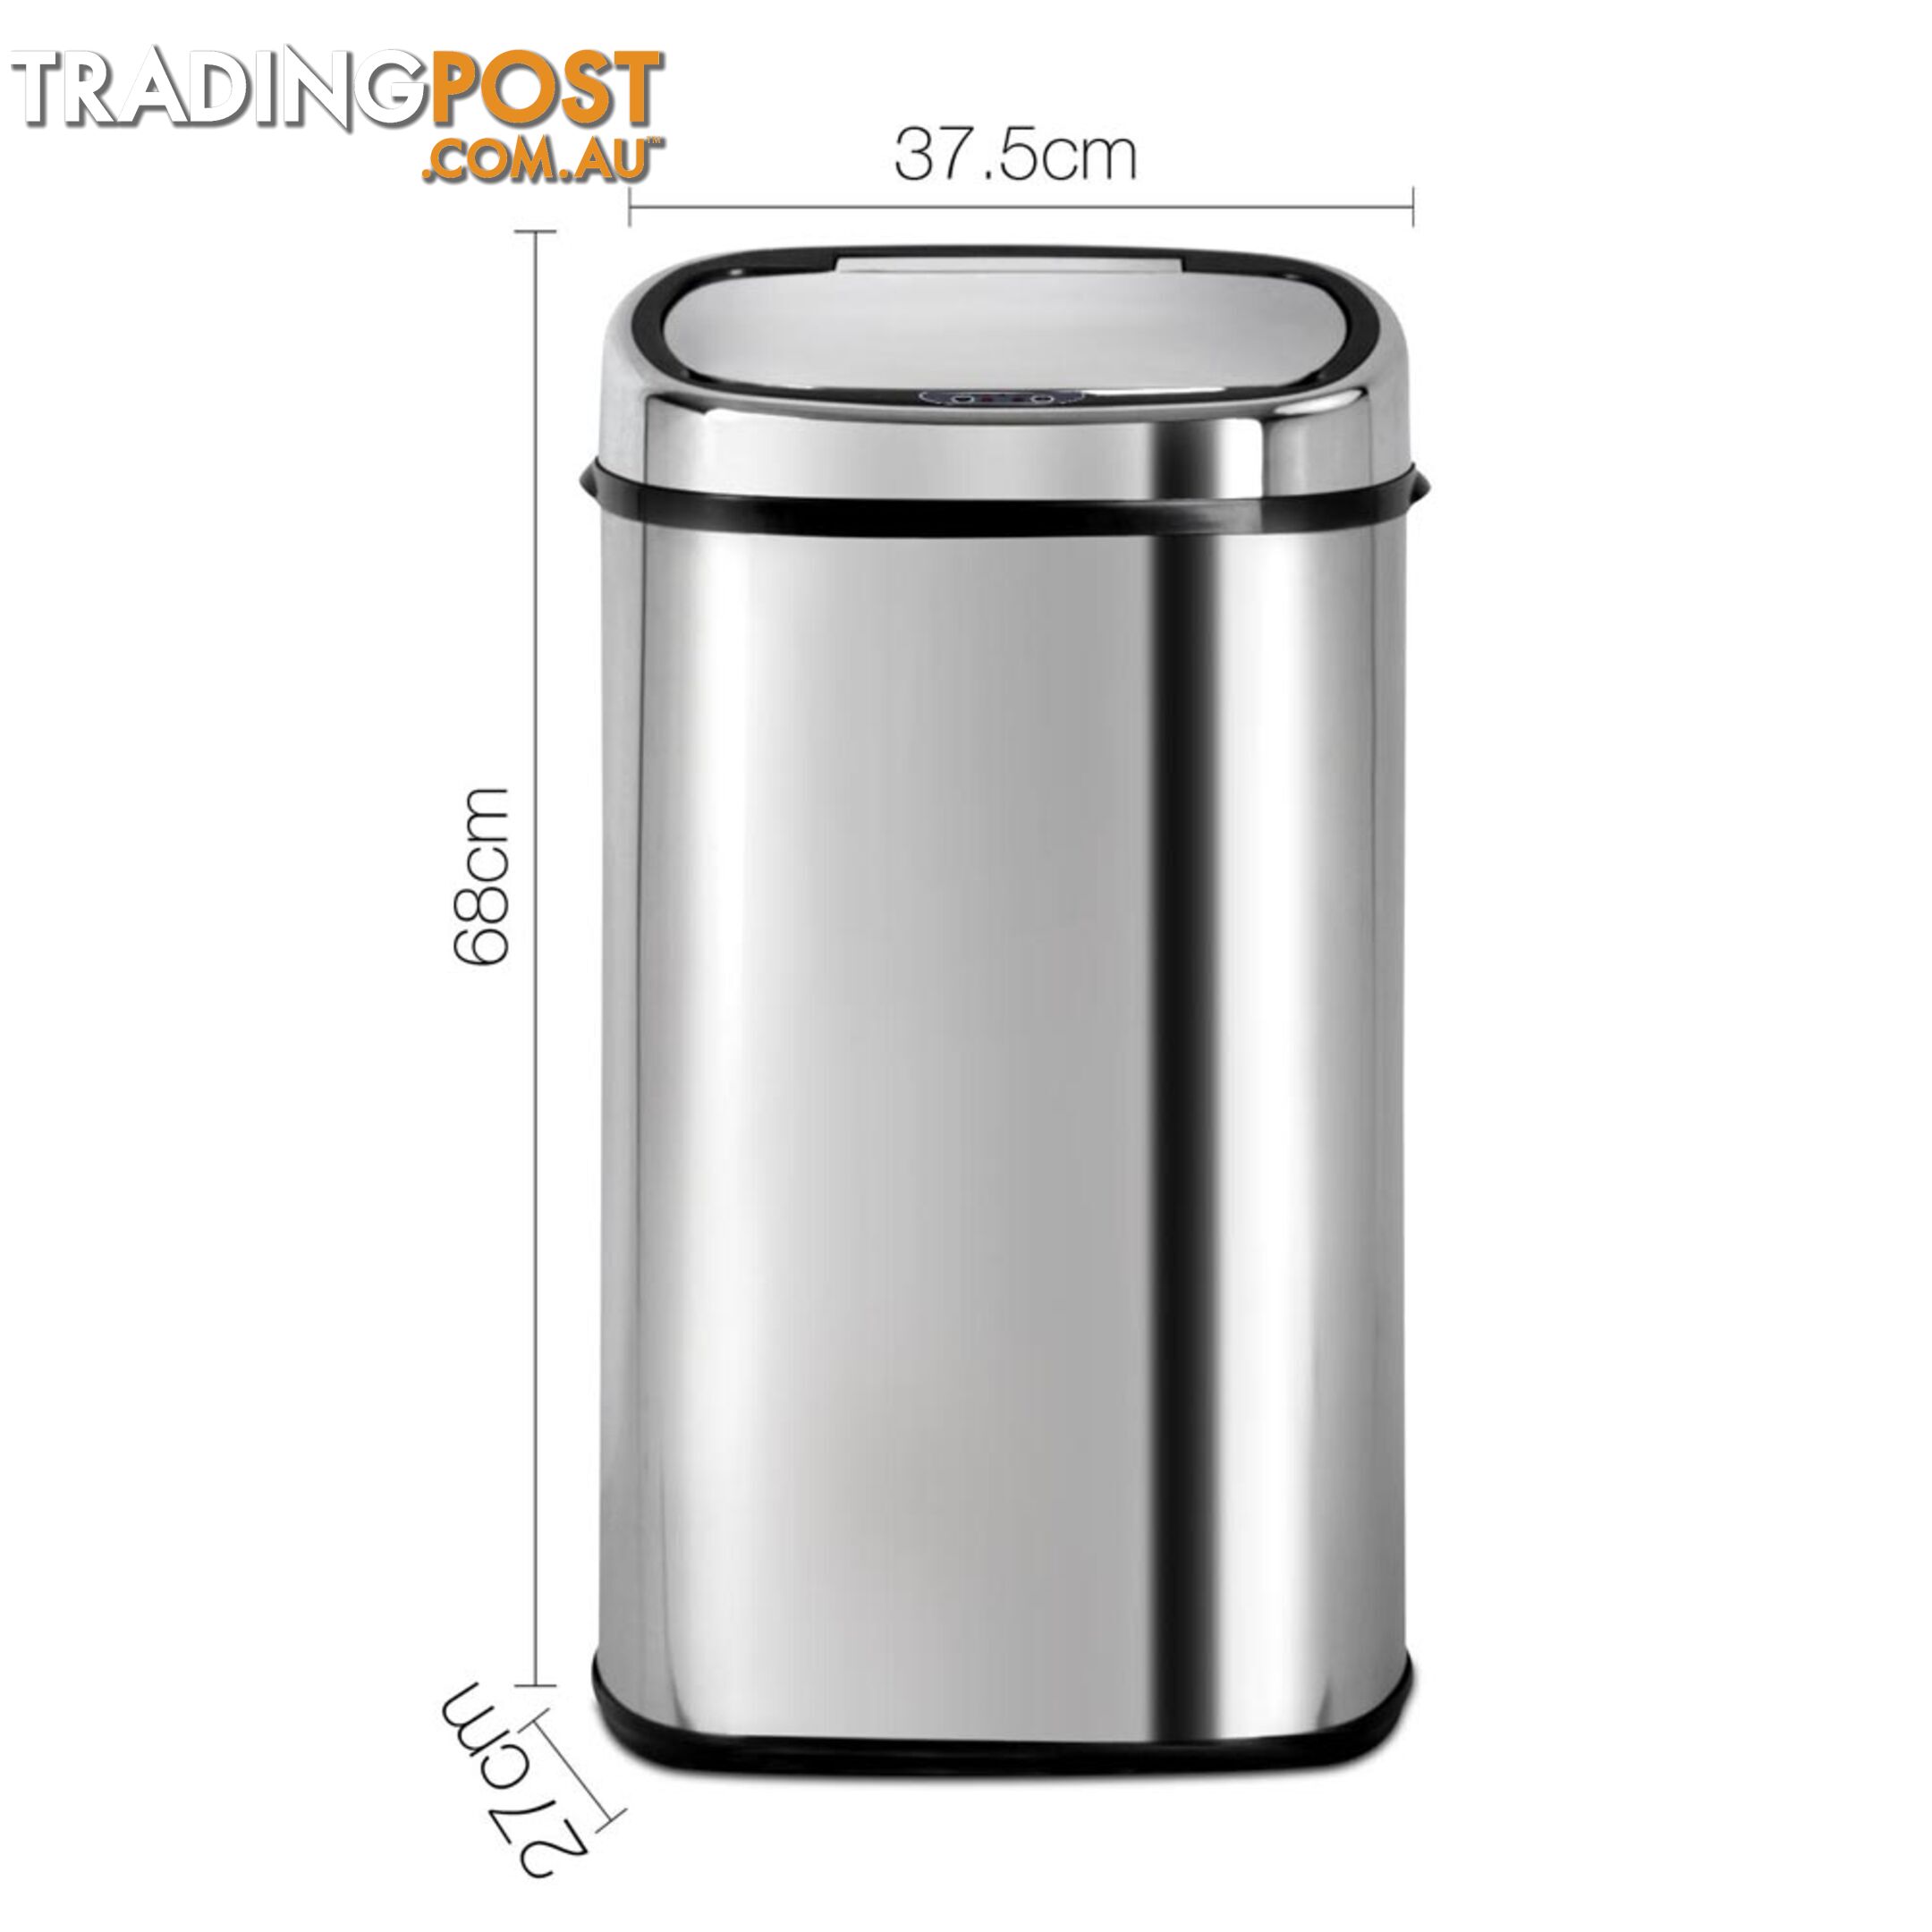 58L Motion Sensor Stainless Steel Rubbish Bin Automatic Kitchen Waste Trash Can